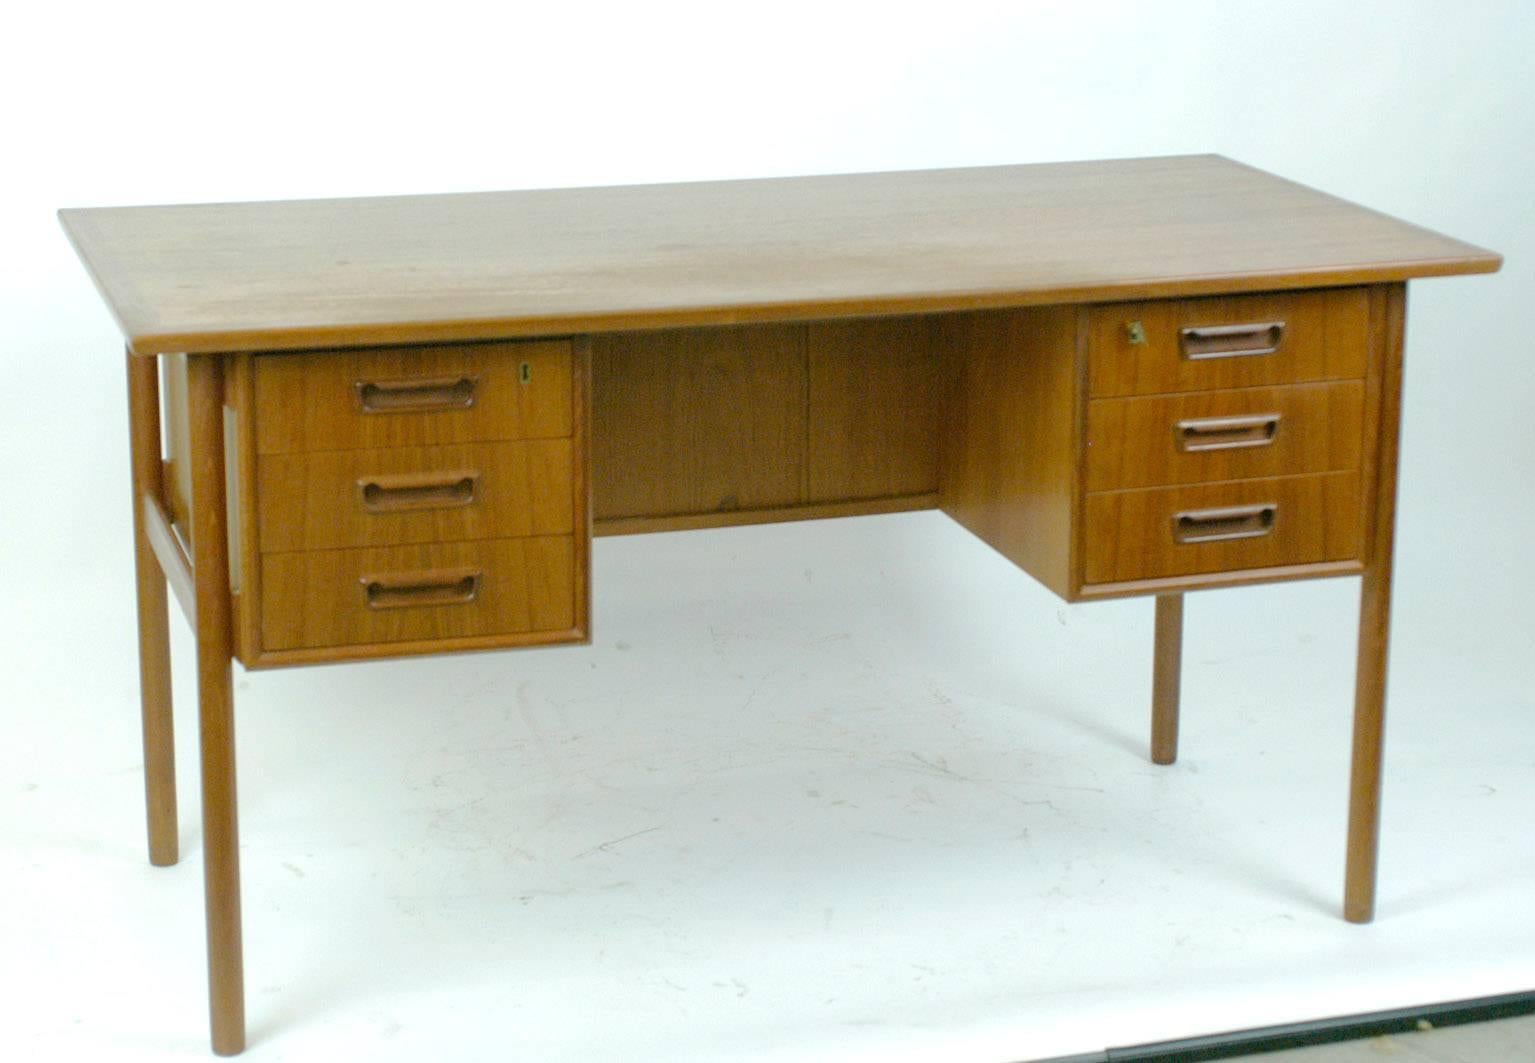 Excellent handcrafted Danish 1960s teak desk with two containers and total six drawers.
On the backside open shelve for more storage.